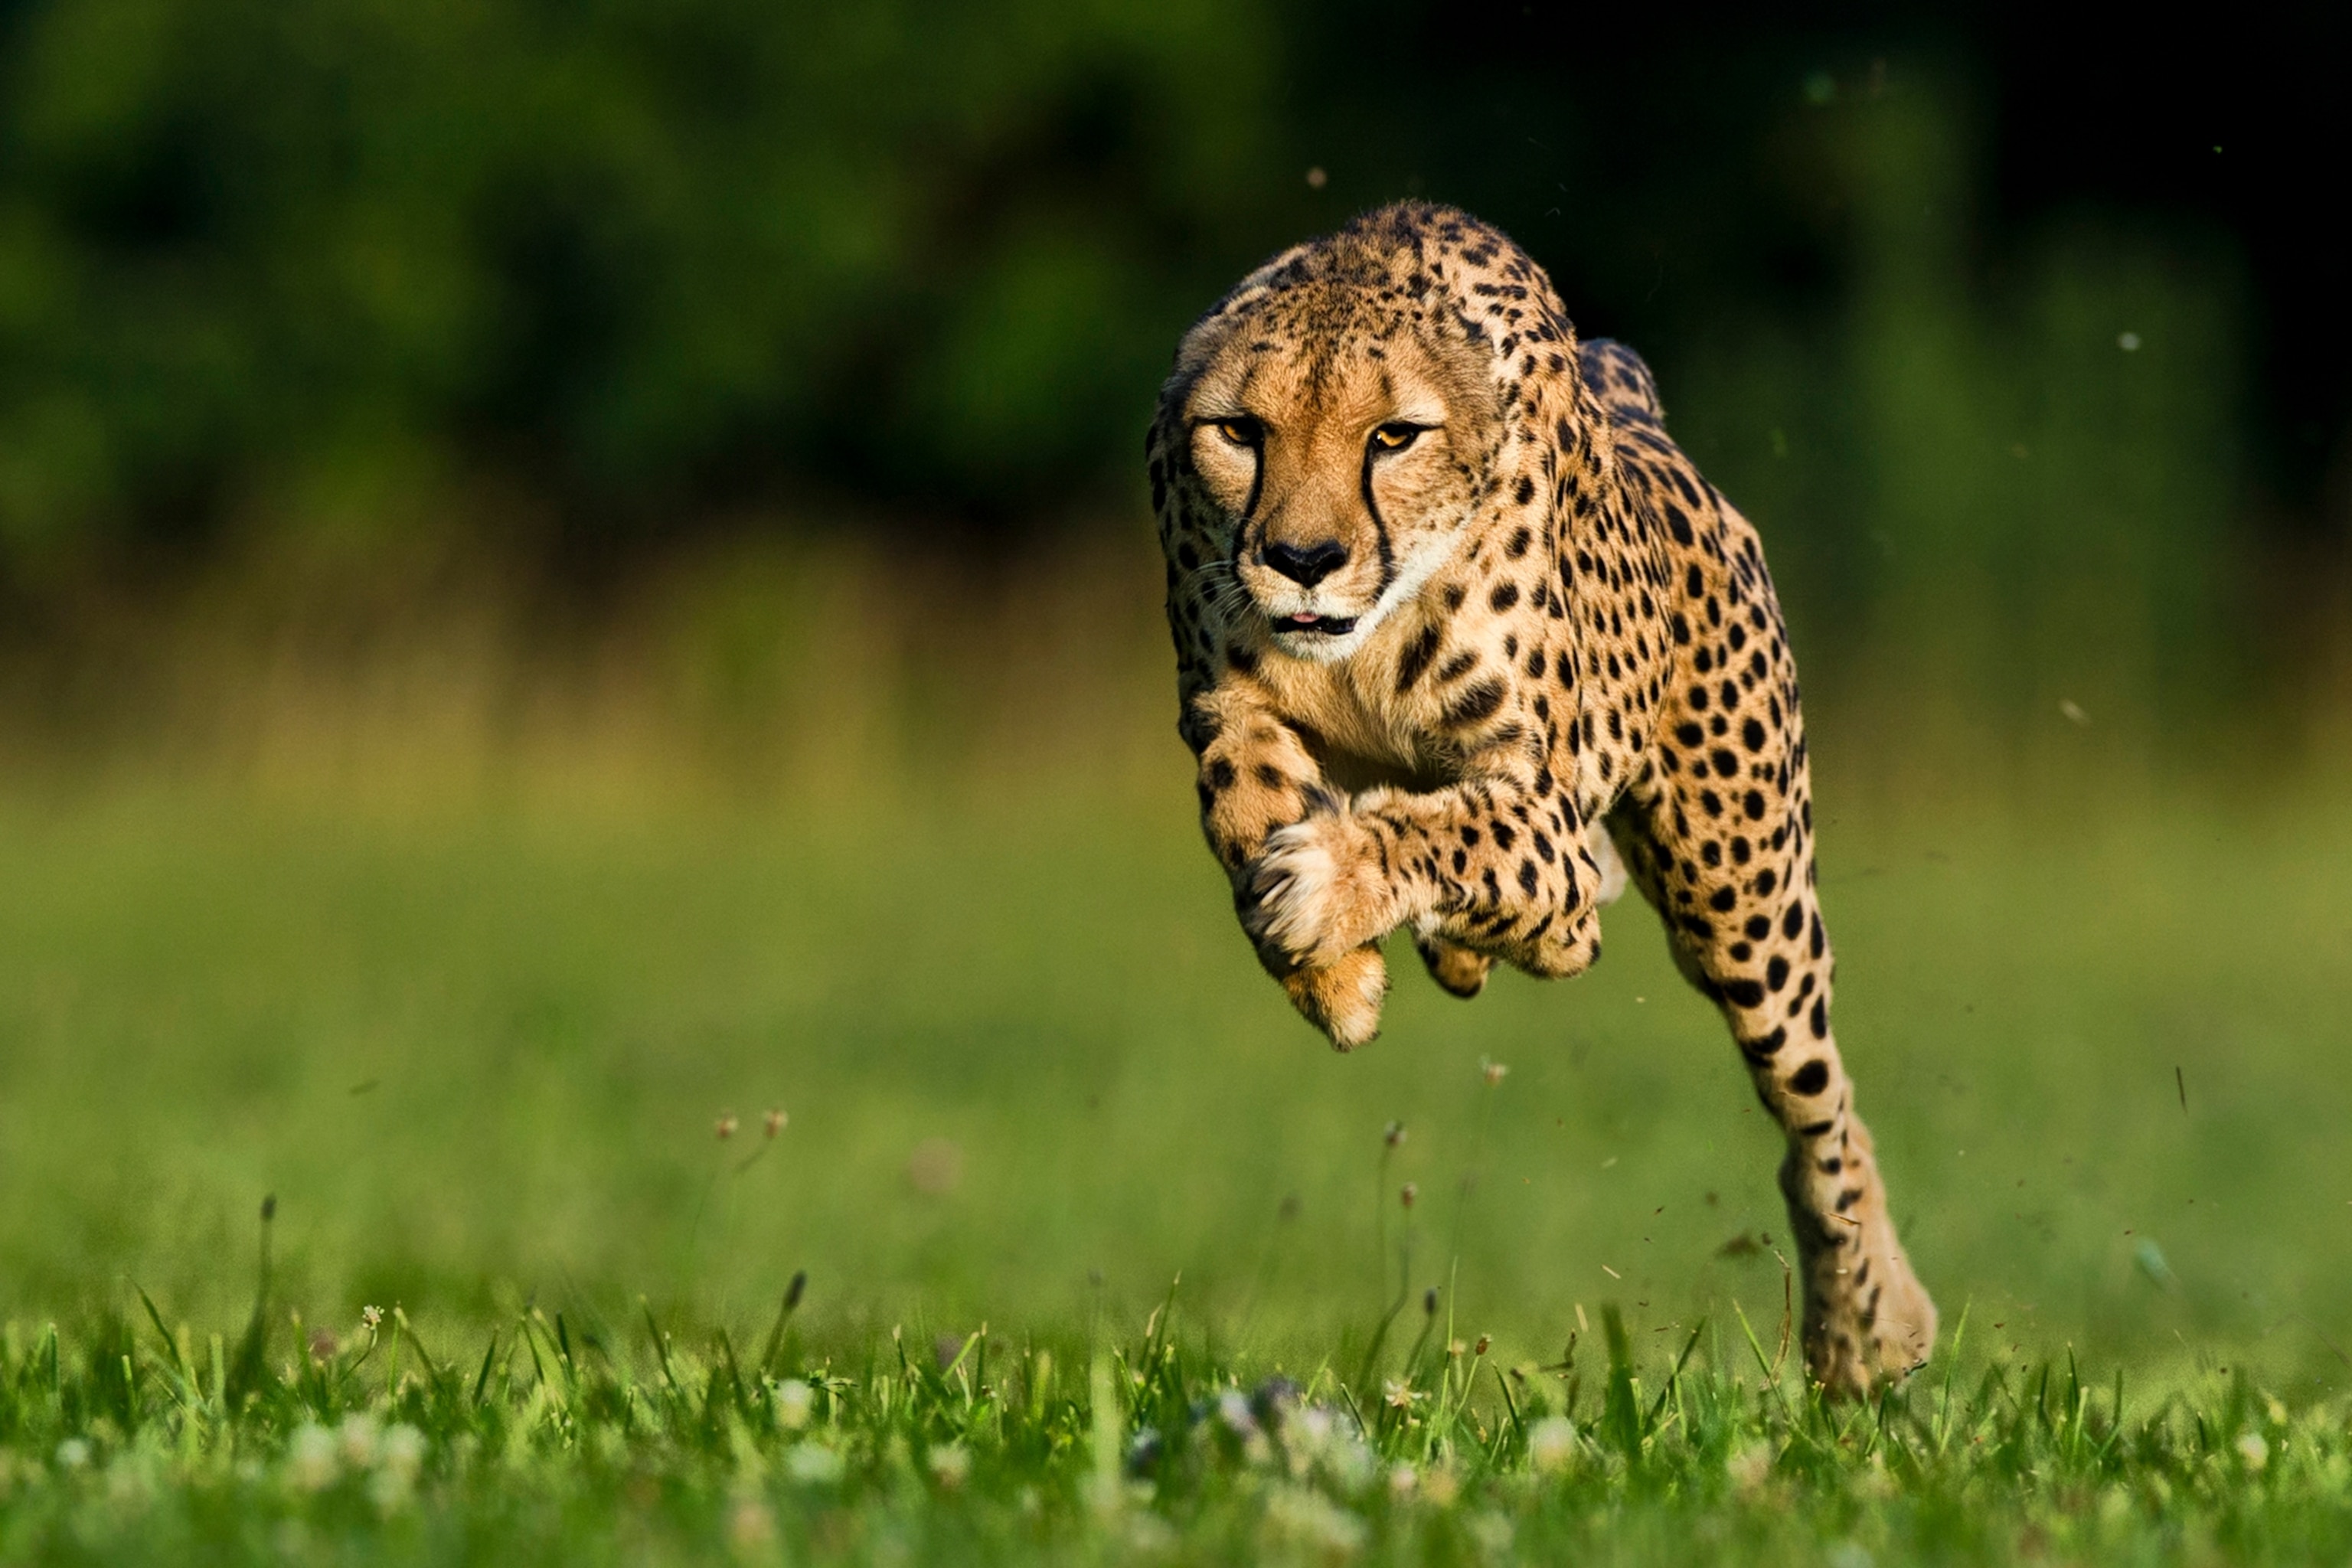 Who is the fastest cheetah?